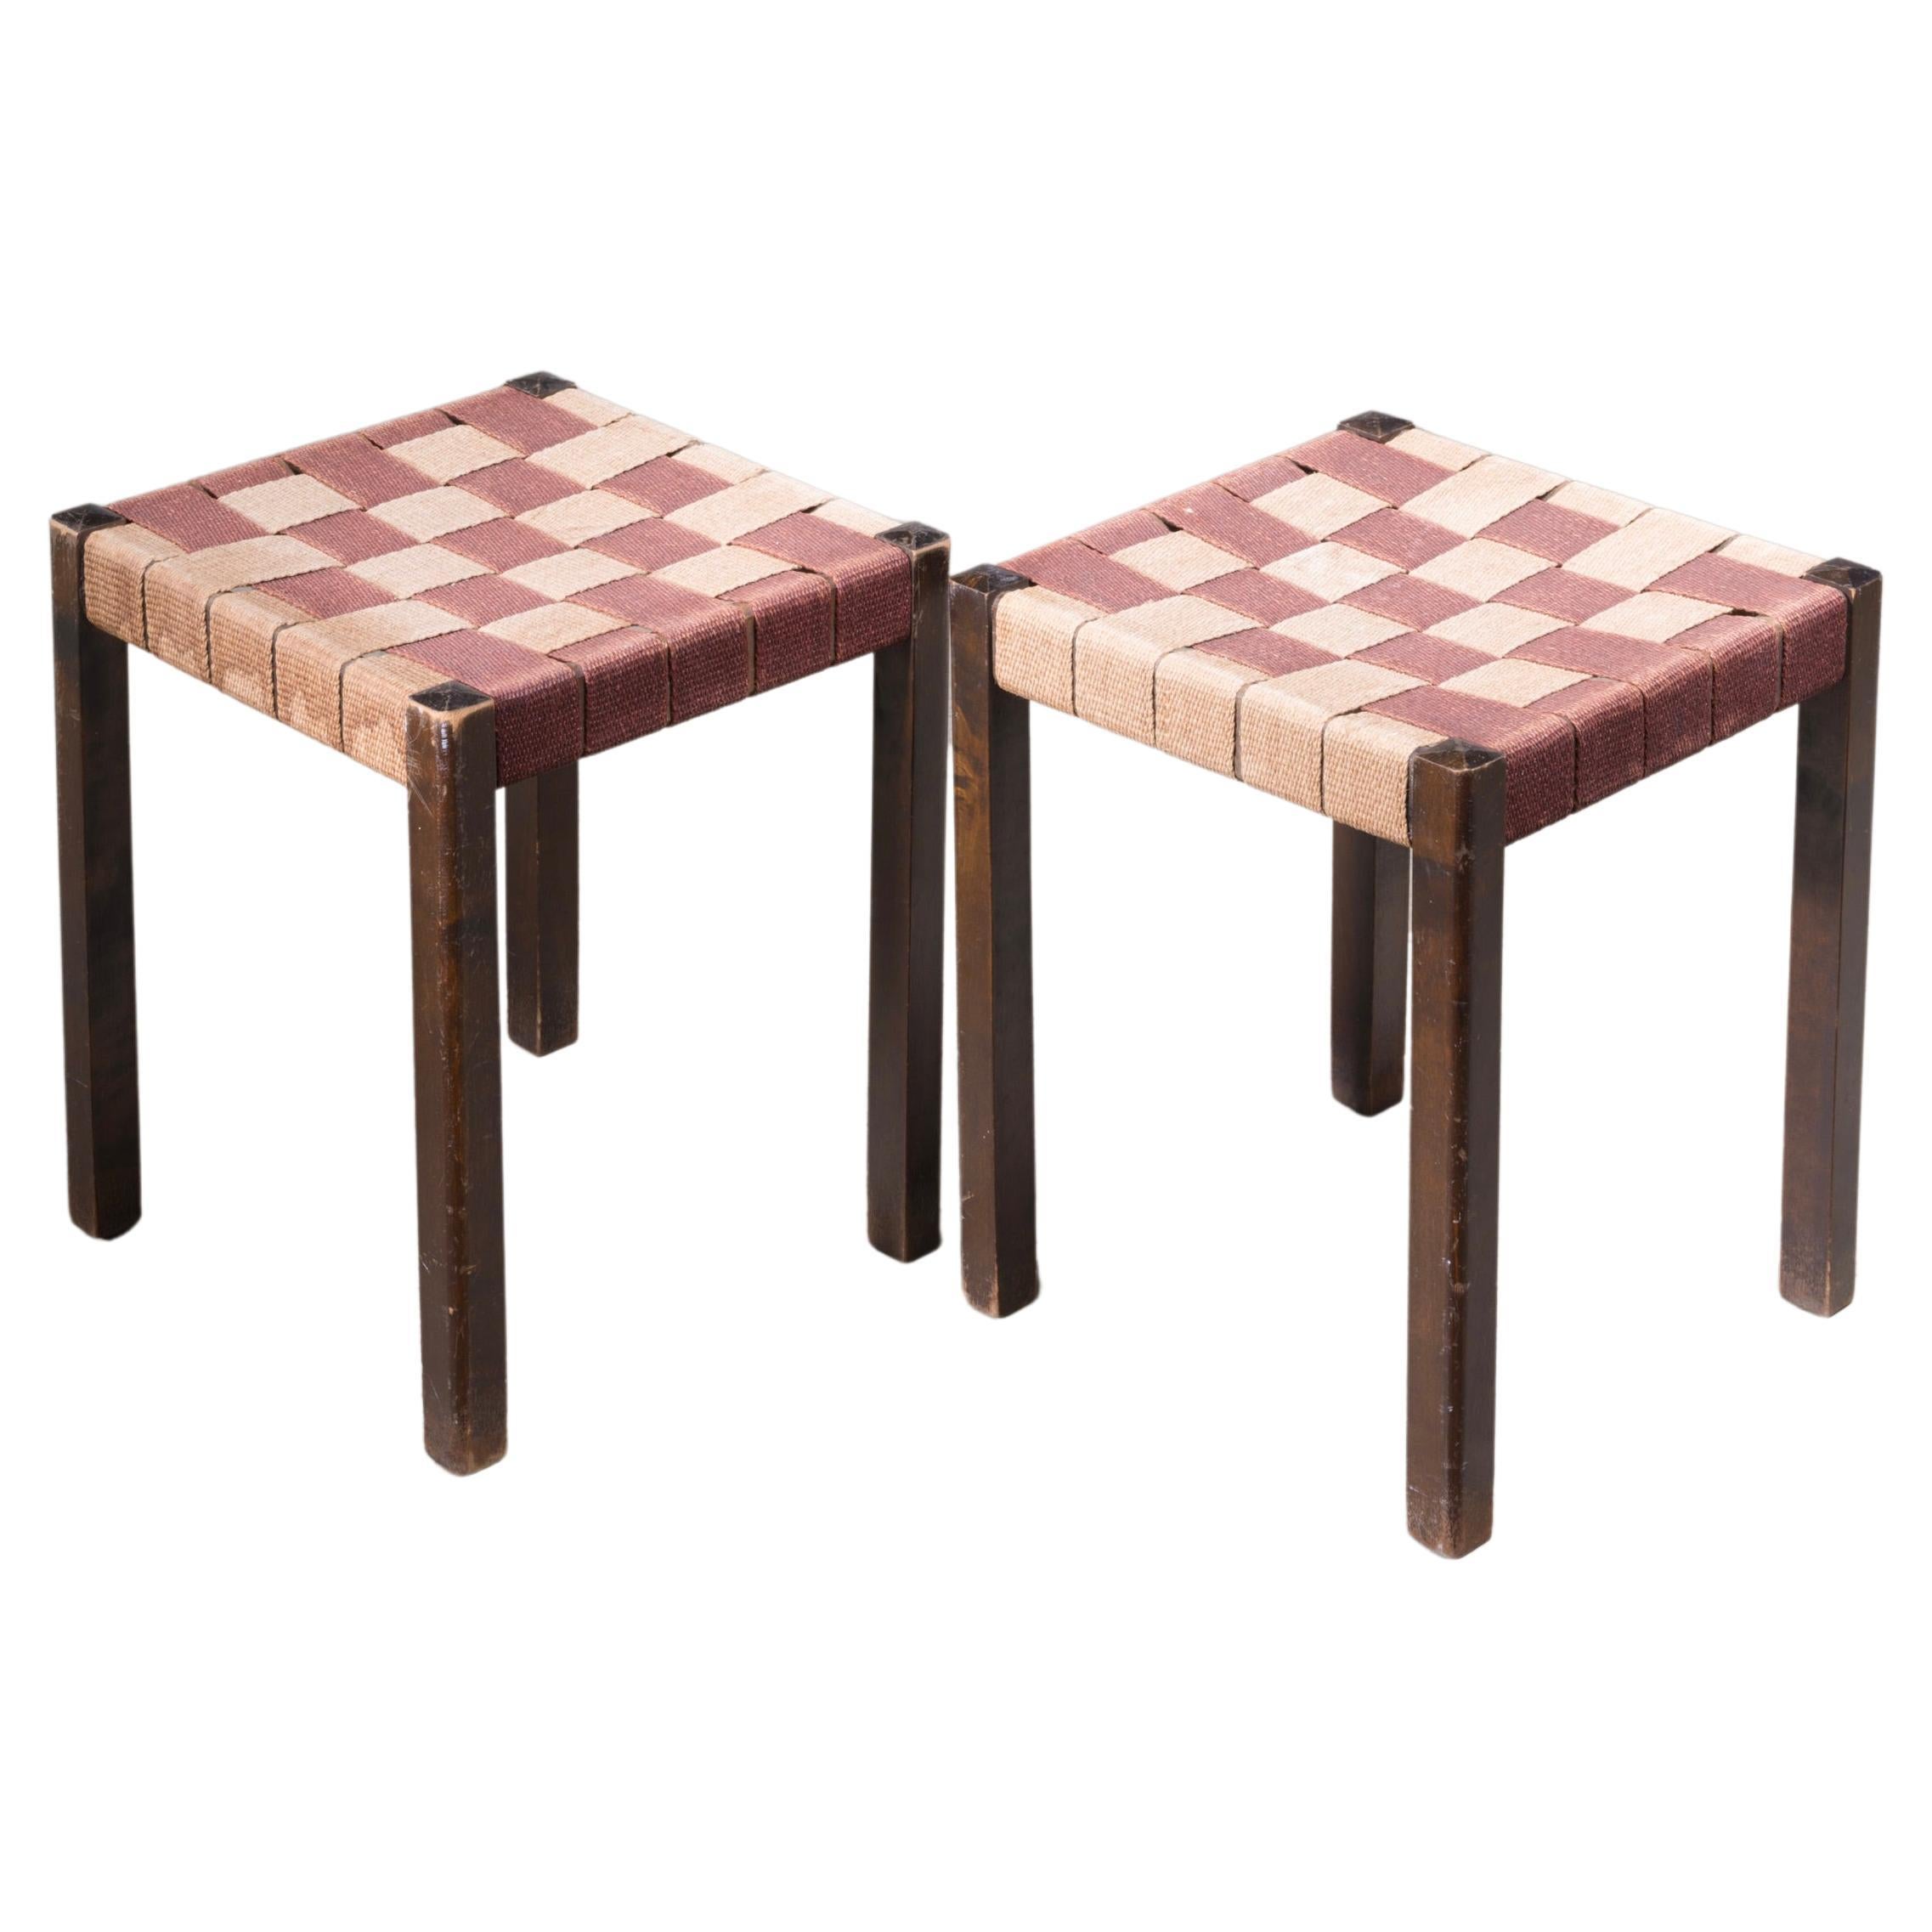 Axel Larsson pair of webbed stools for SMF, Bodafors, Sweden, 1920s For Sale